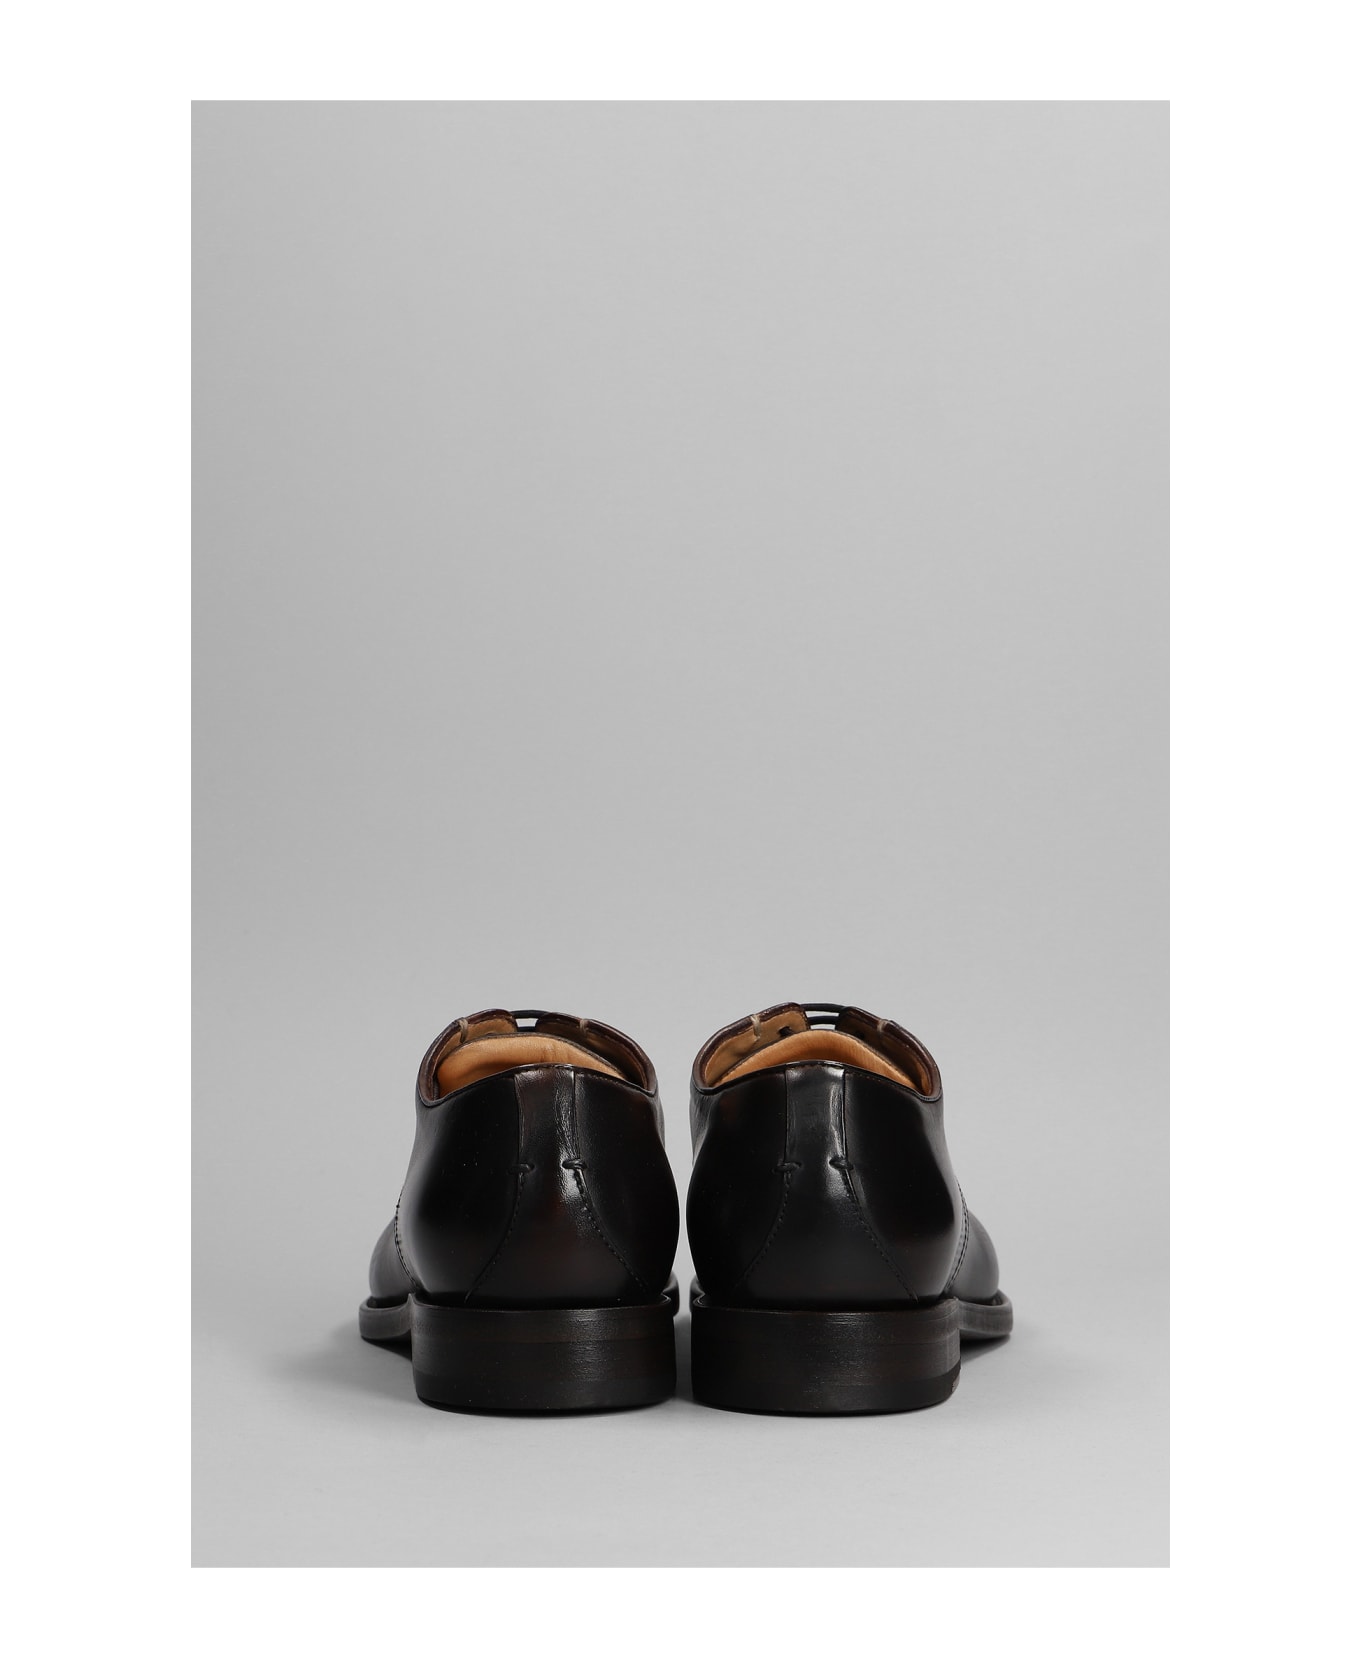 Silvano Sassetti Lace Up Shoes In Dark Brown Leather - dark brown